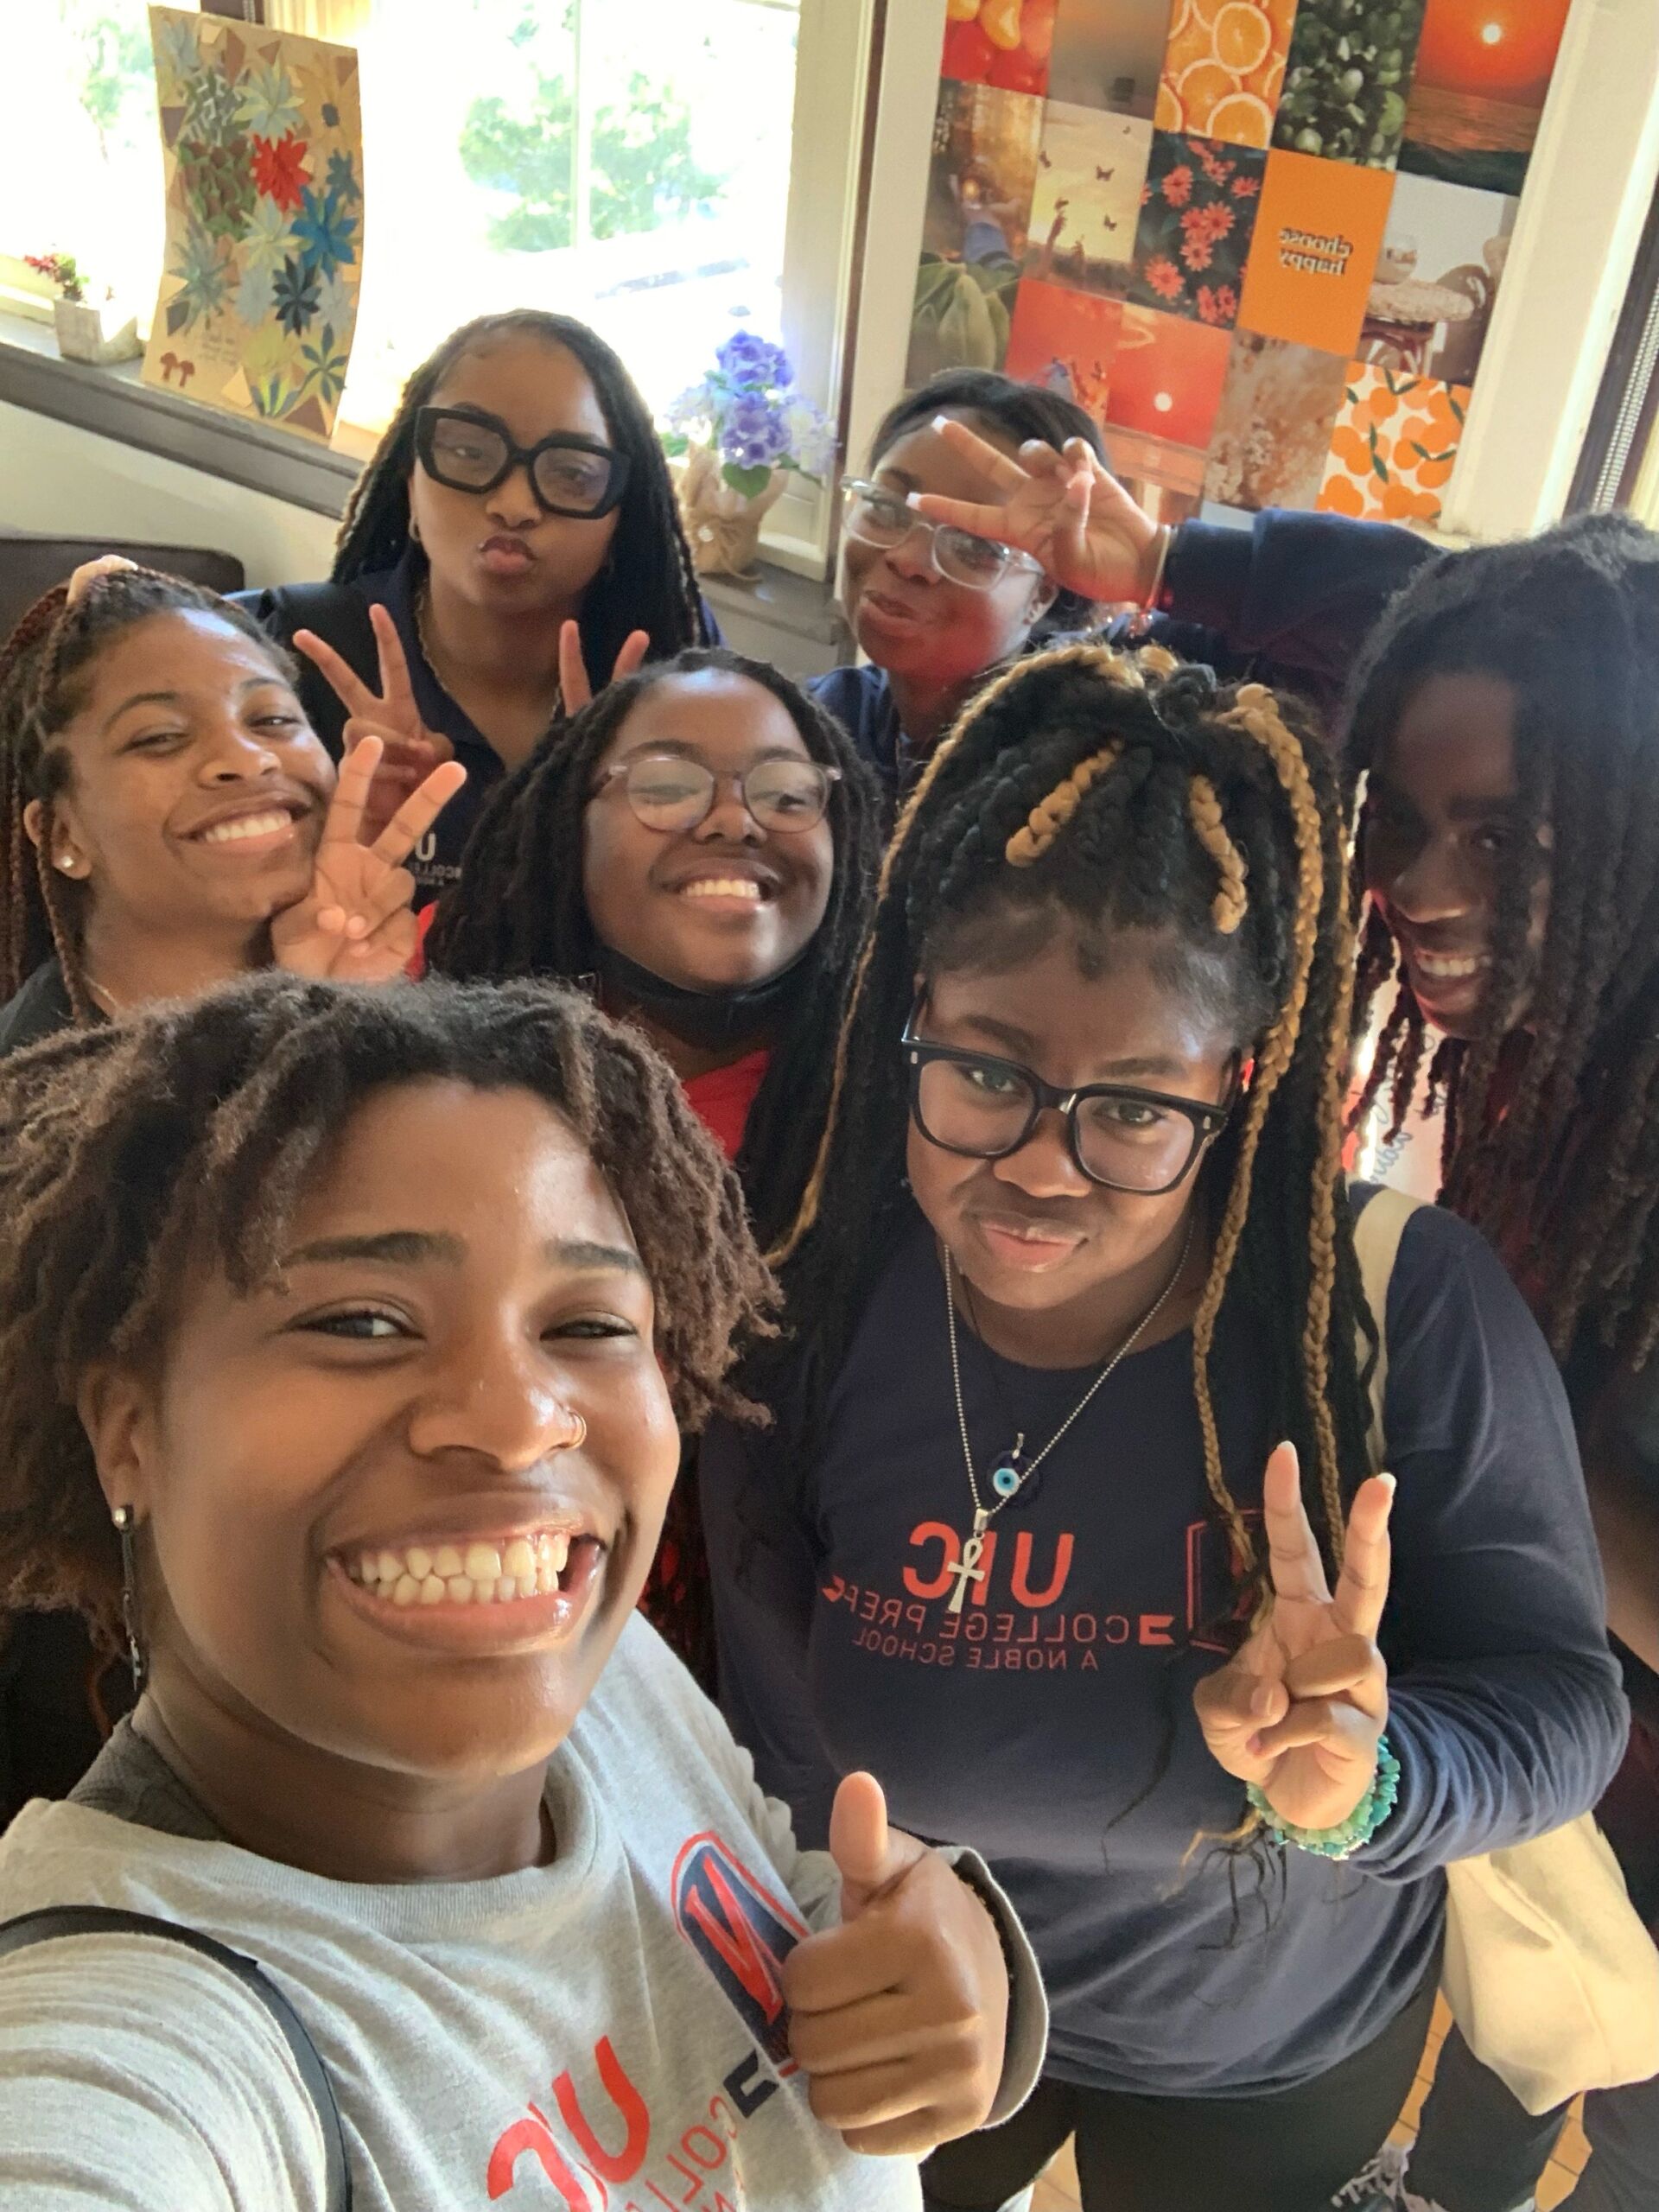 Seven students are visible in the selfie. Some students are posing with peace signs while others are just smiling. One student has their thumbs up as their taking the selfie.